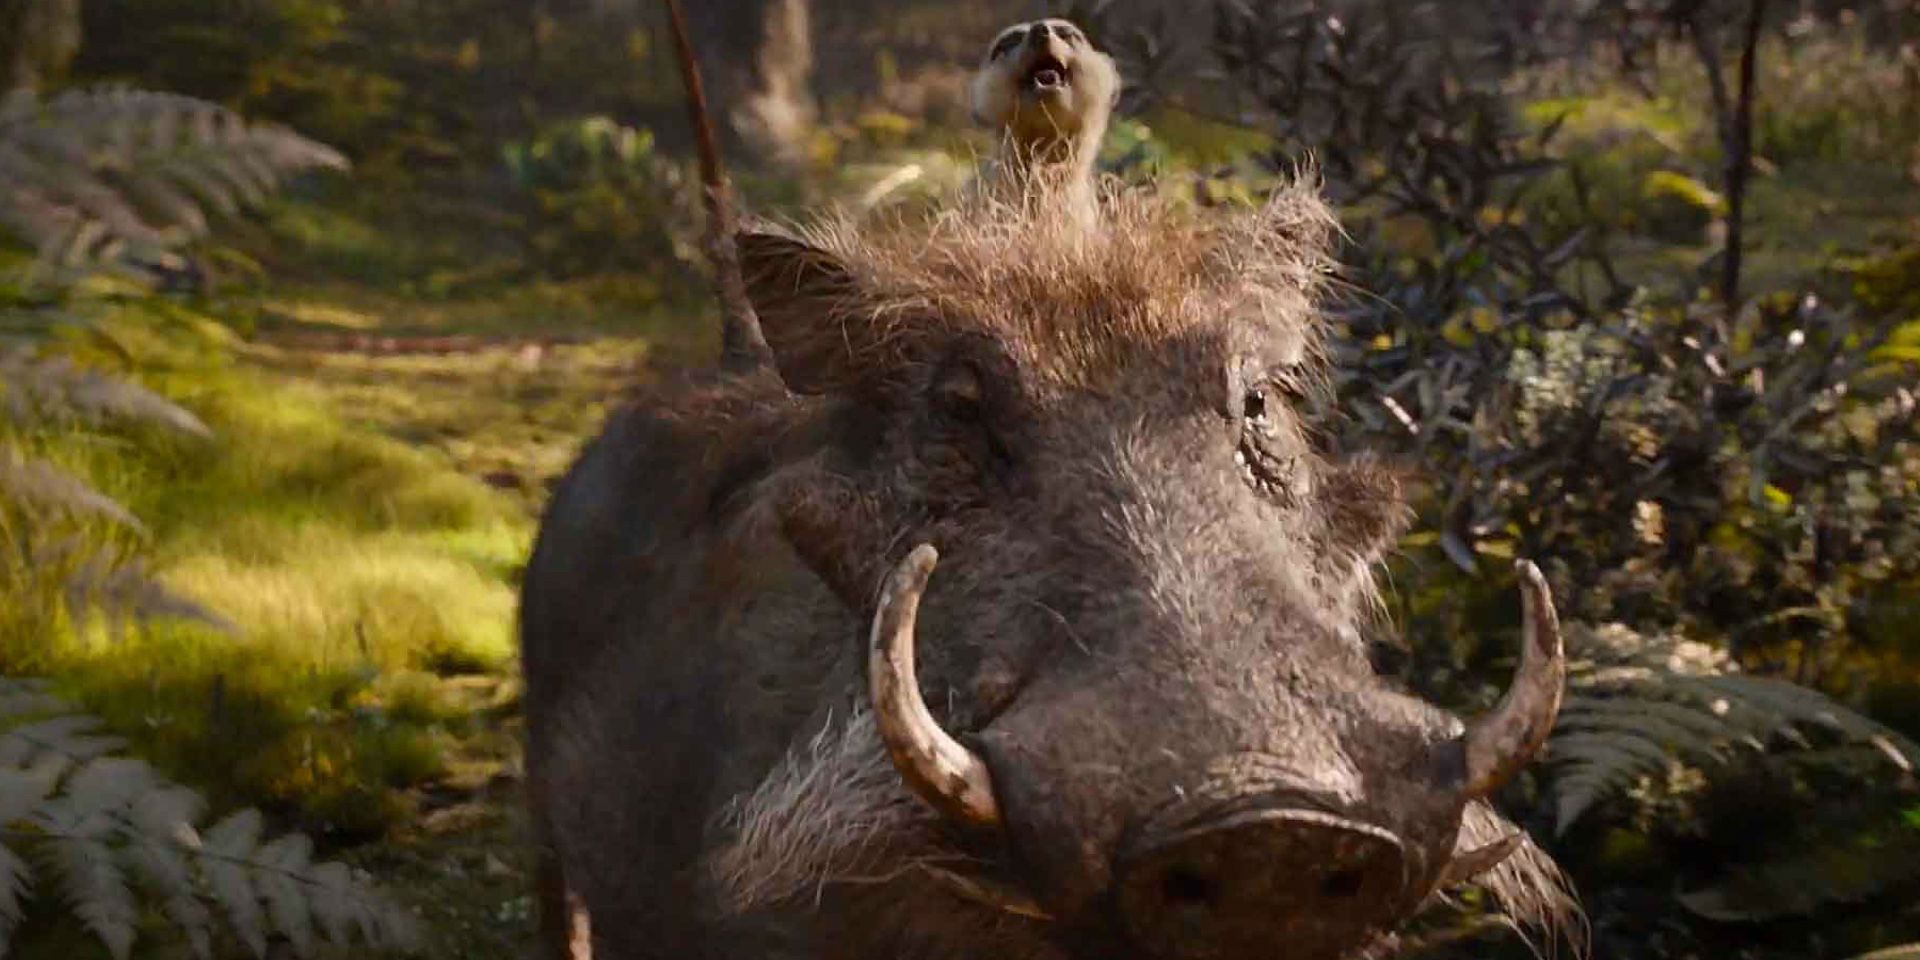 Timon Riding Pumbaa in The Lion King